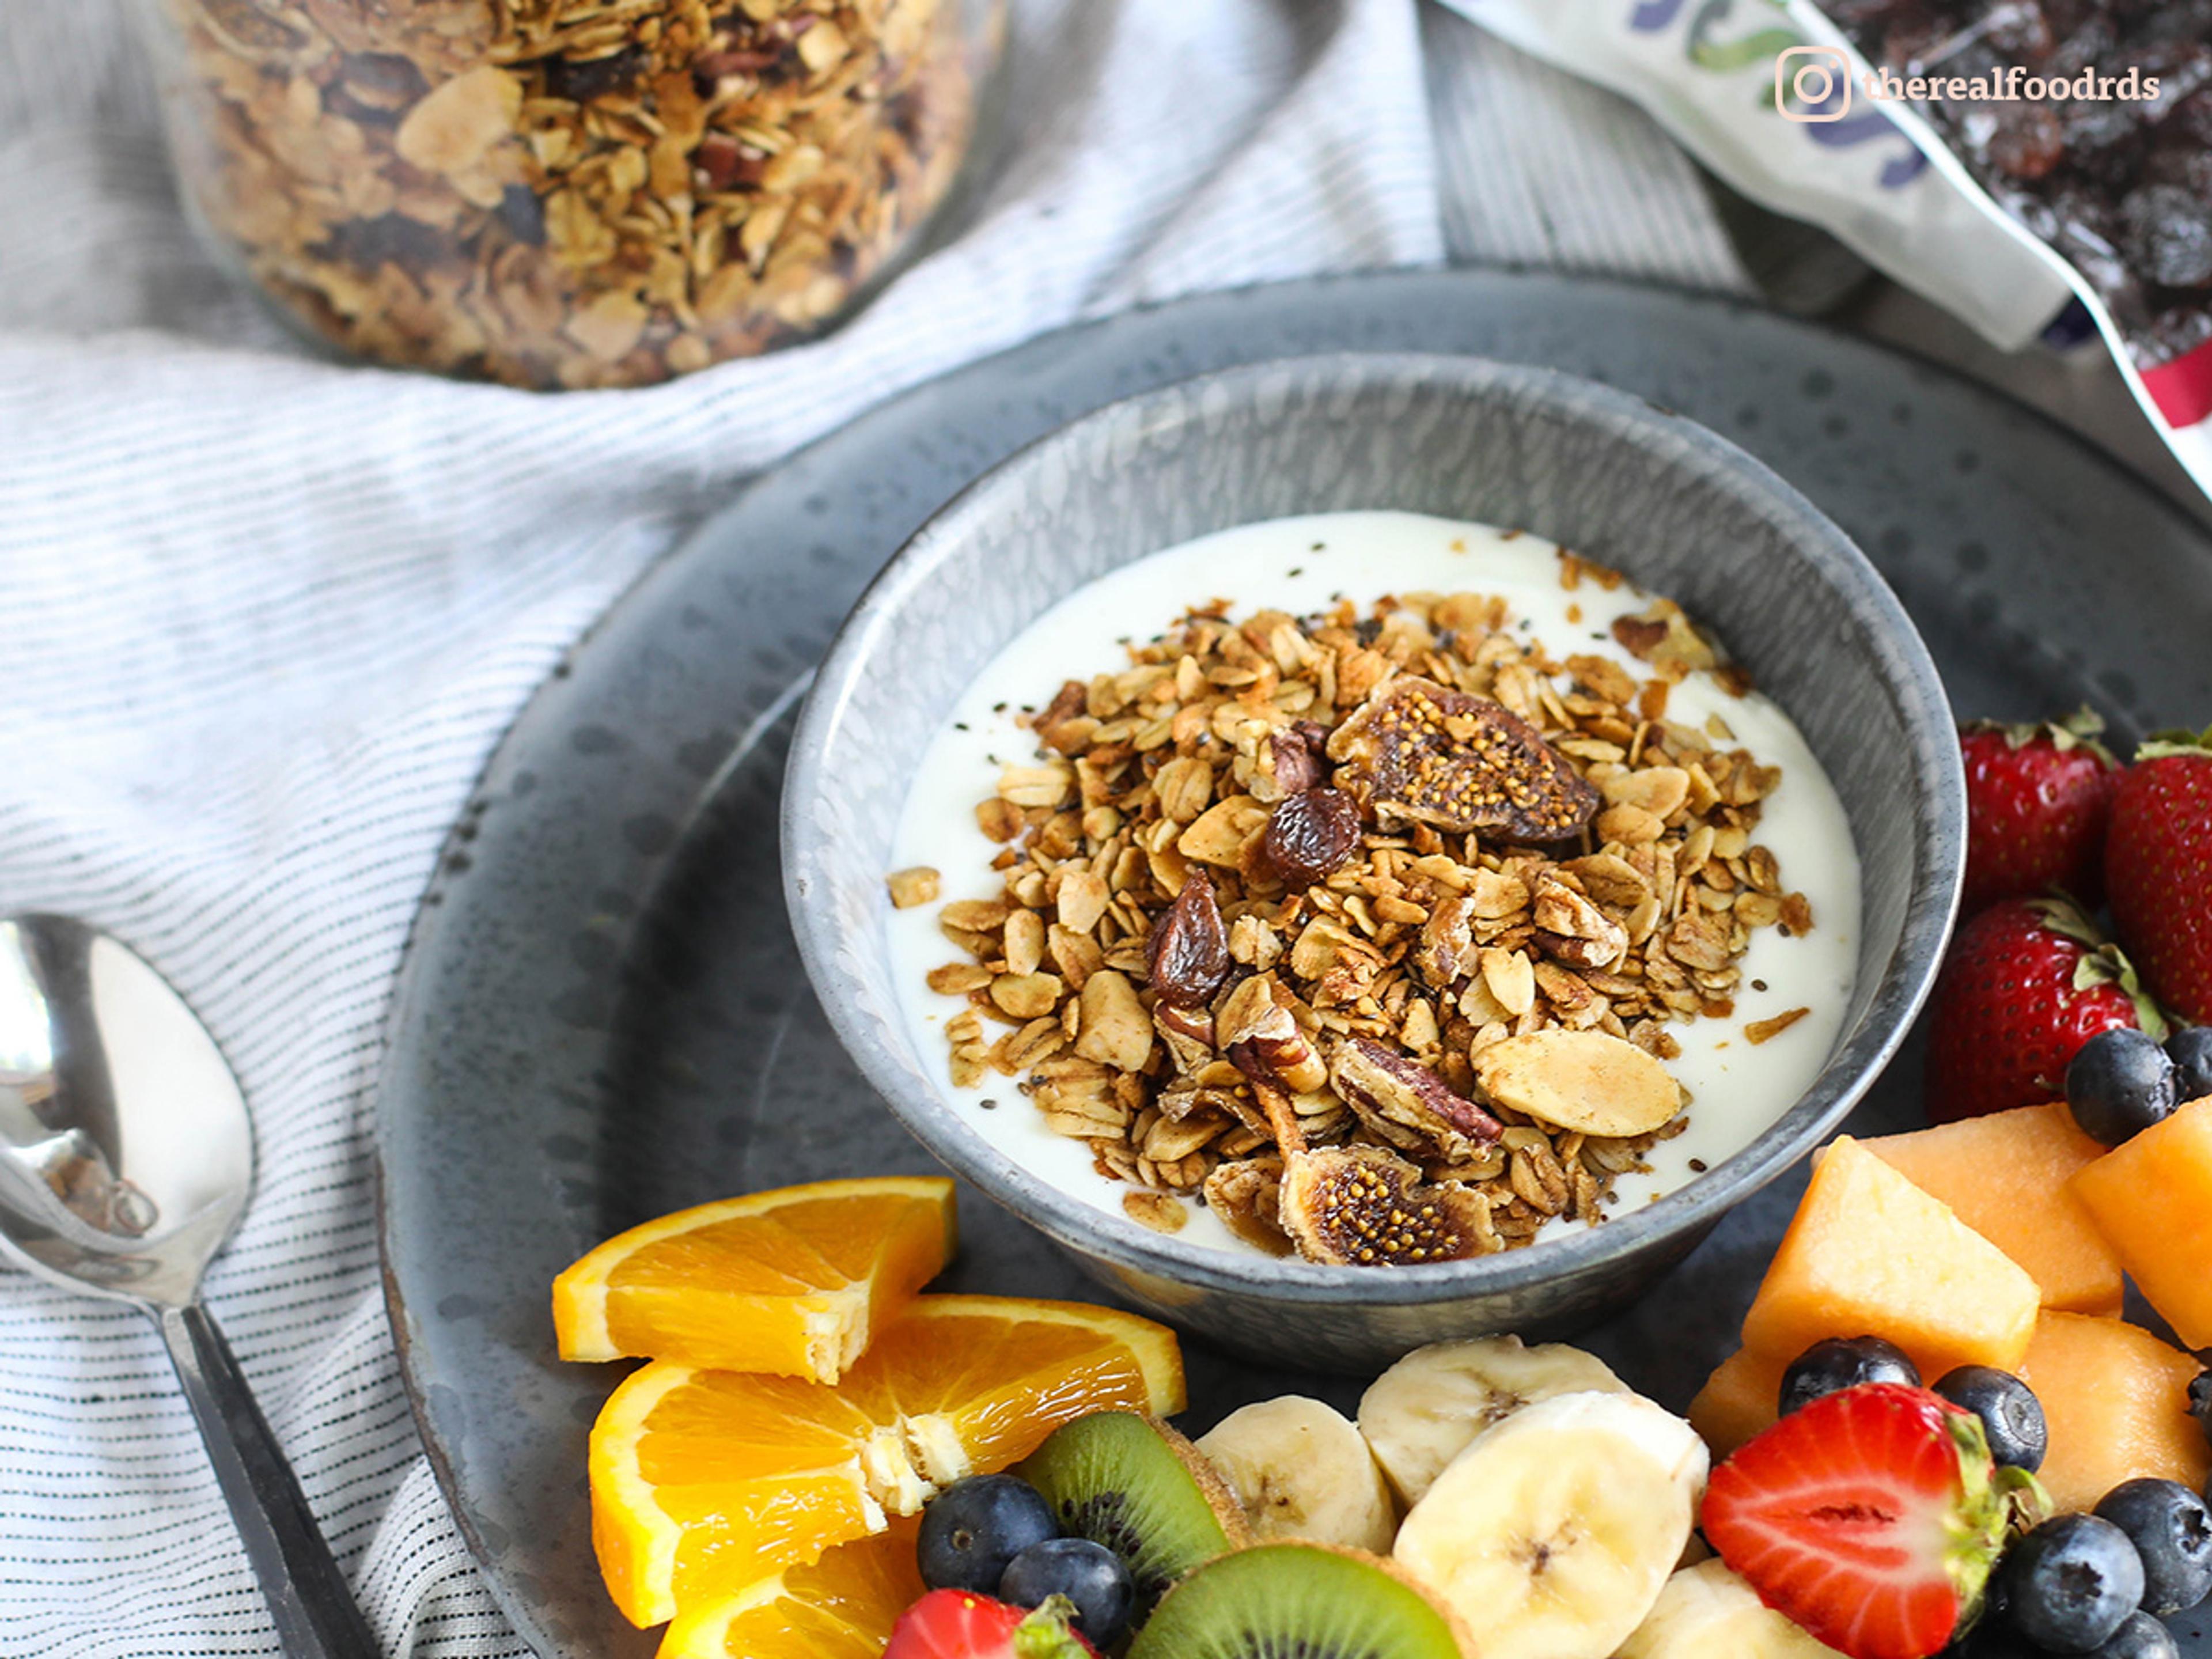 Homemade granola and grass-fed yogurt with fresh fruit on the side. Photo by Real Food Dietitians.